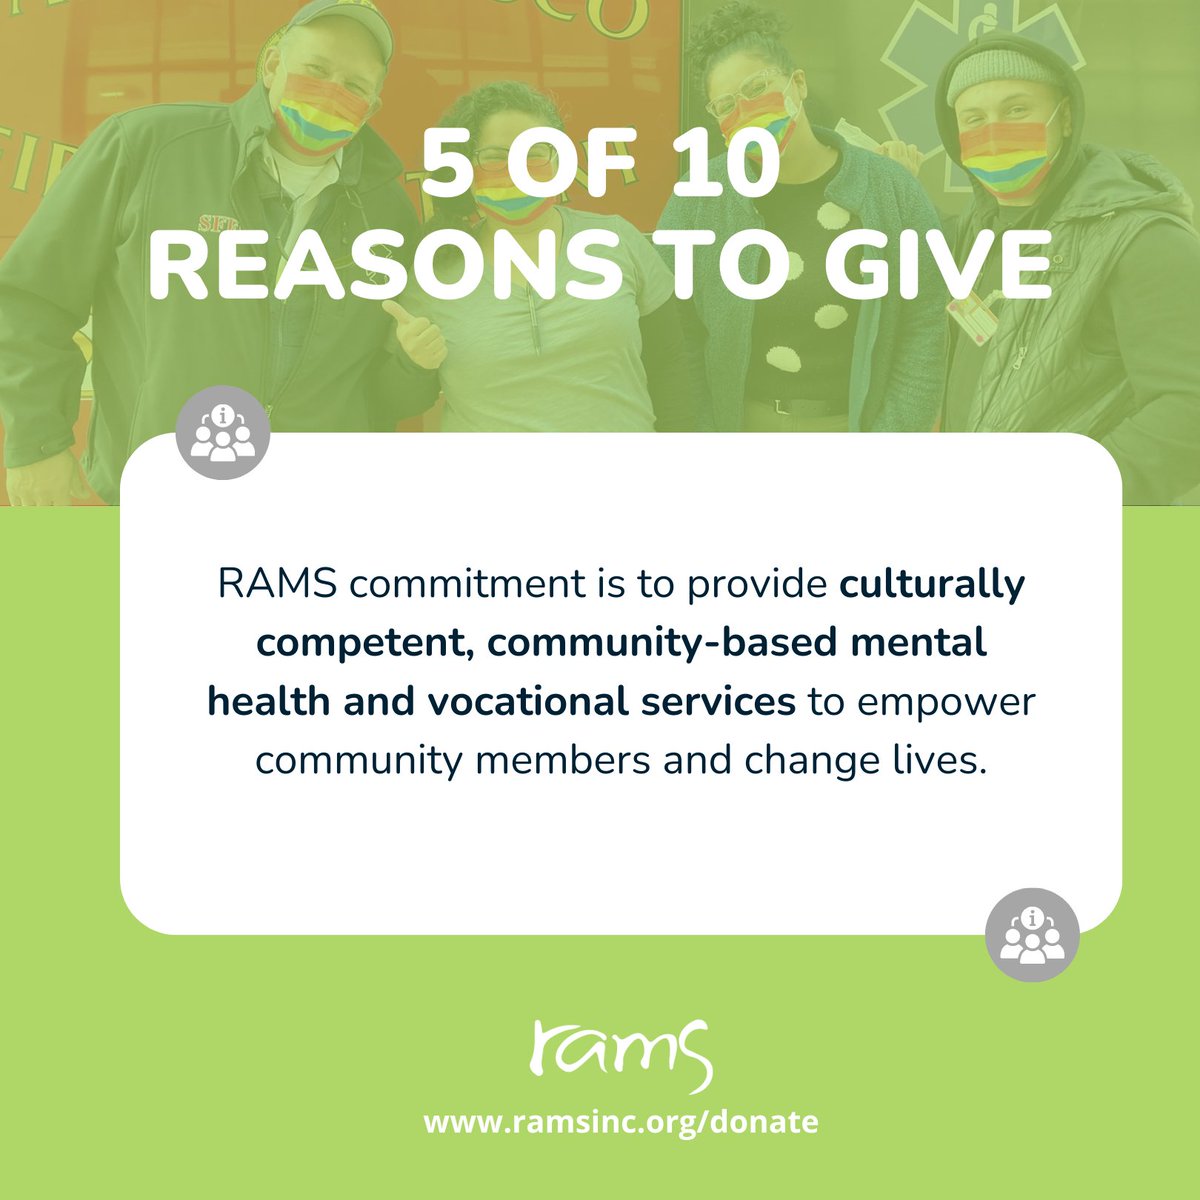 Day 5 of 10 Reasons to Give to RAMS: Since 1974 RAMS, Inc. has been a cornerstone of advocacy & impact in SF. Consider making a donation this holiday season to help contribute to the impact: ramsinc.org/donate